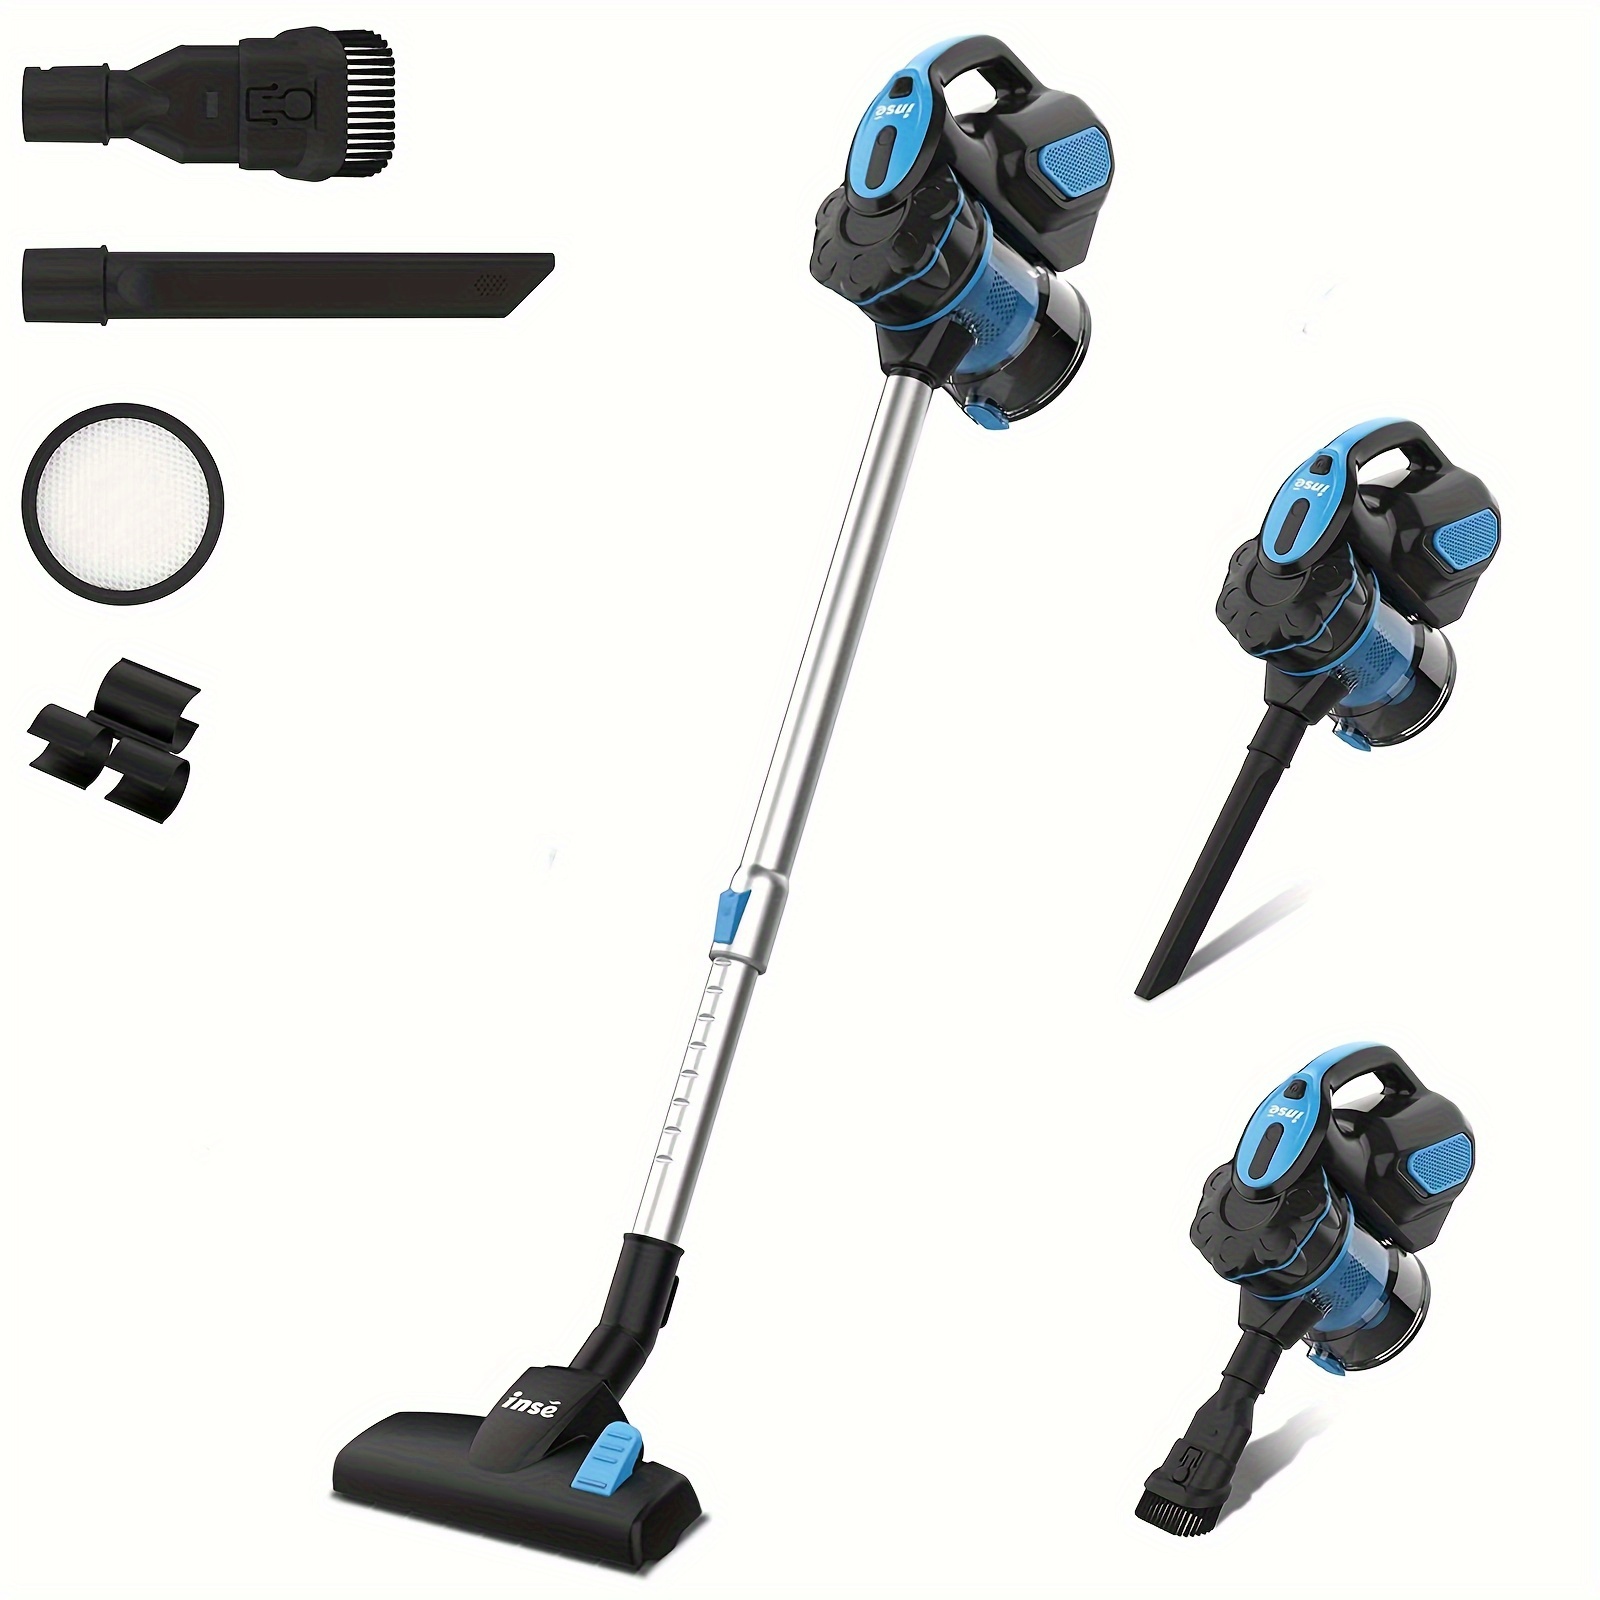 

Corded Stick Vacuum Cleaner, Corded Vacuum Cleaner With 600w Powerful Motor 18000pa Handheld Vacuum Cleaner For Home Pet Hair Hard Floor